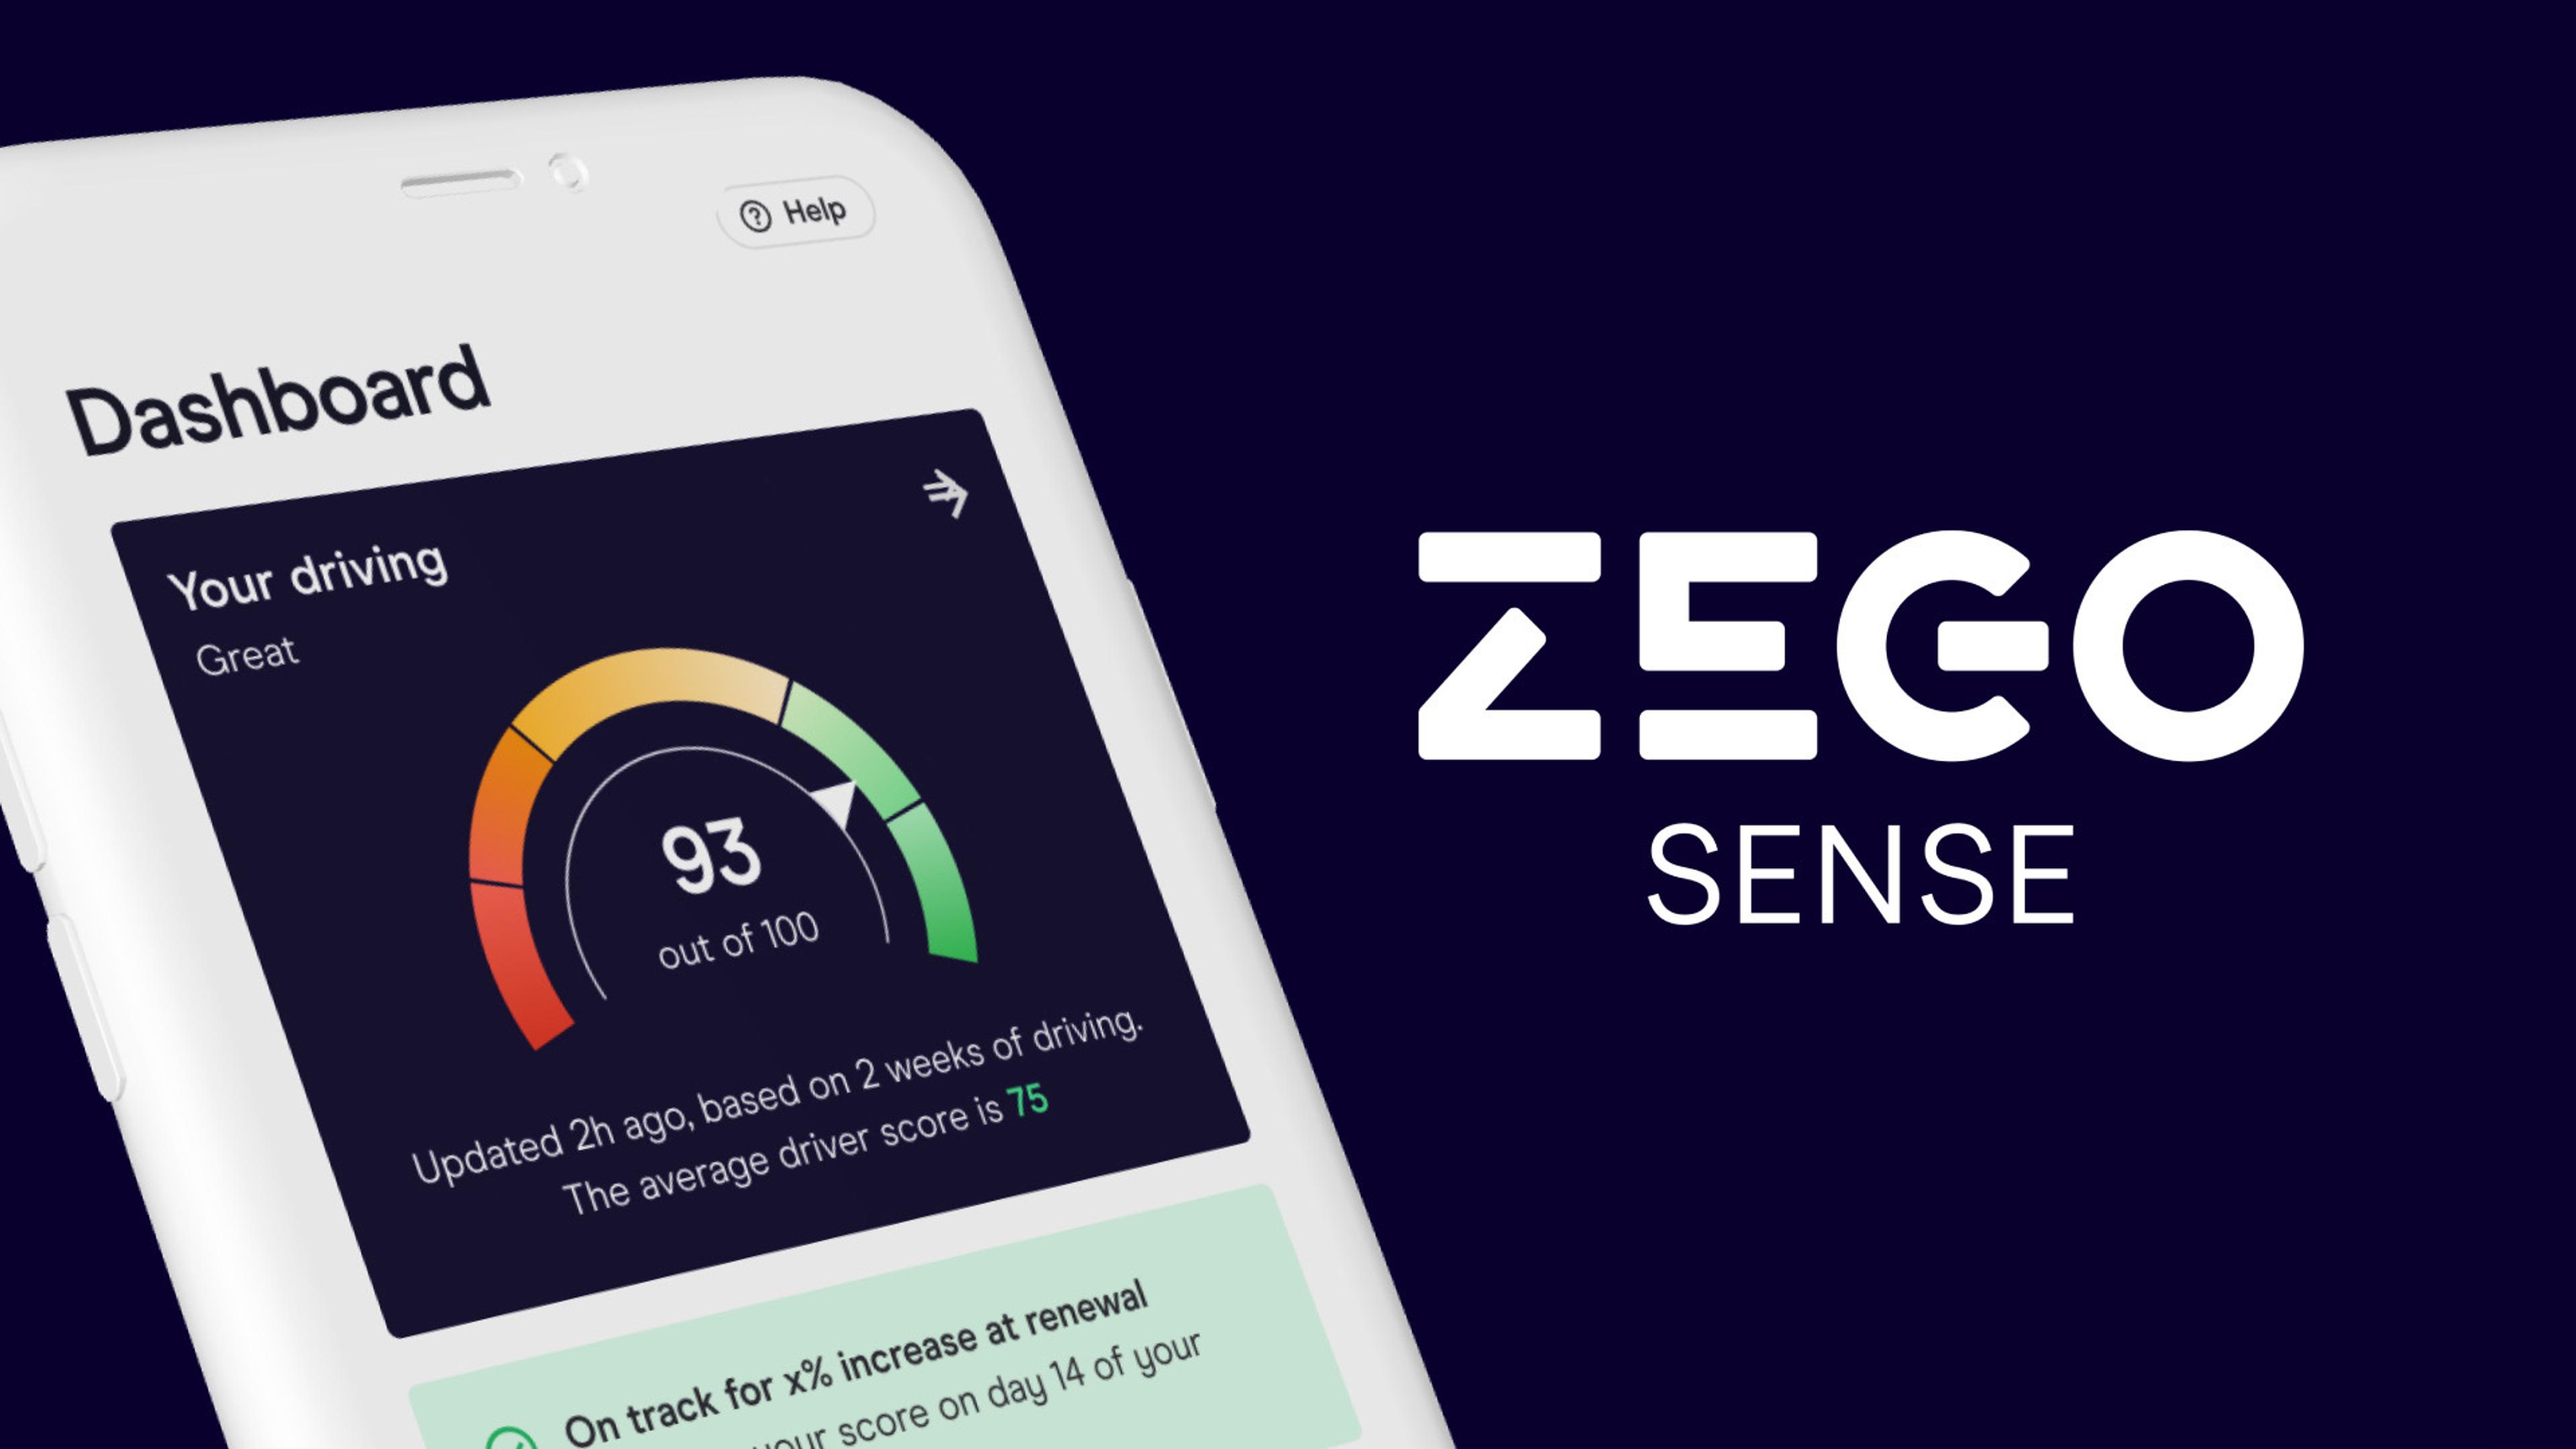 How Zego Sense Policies Provide Better Prices & The Fairest Vehicle Insurance